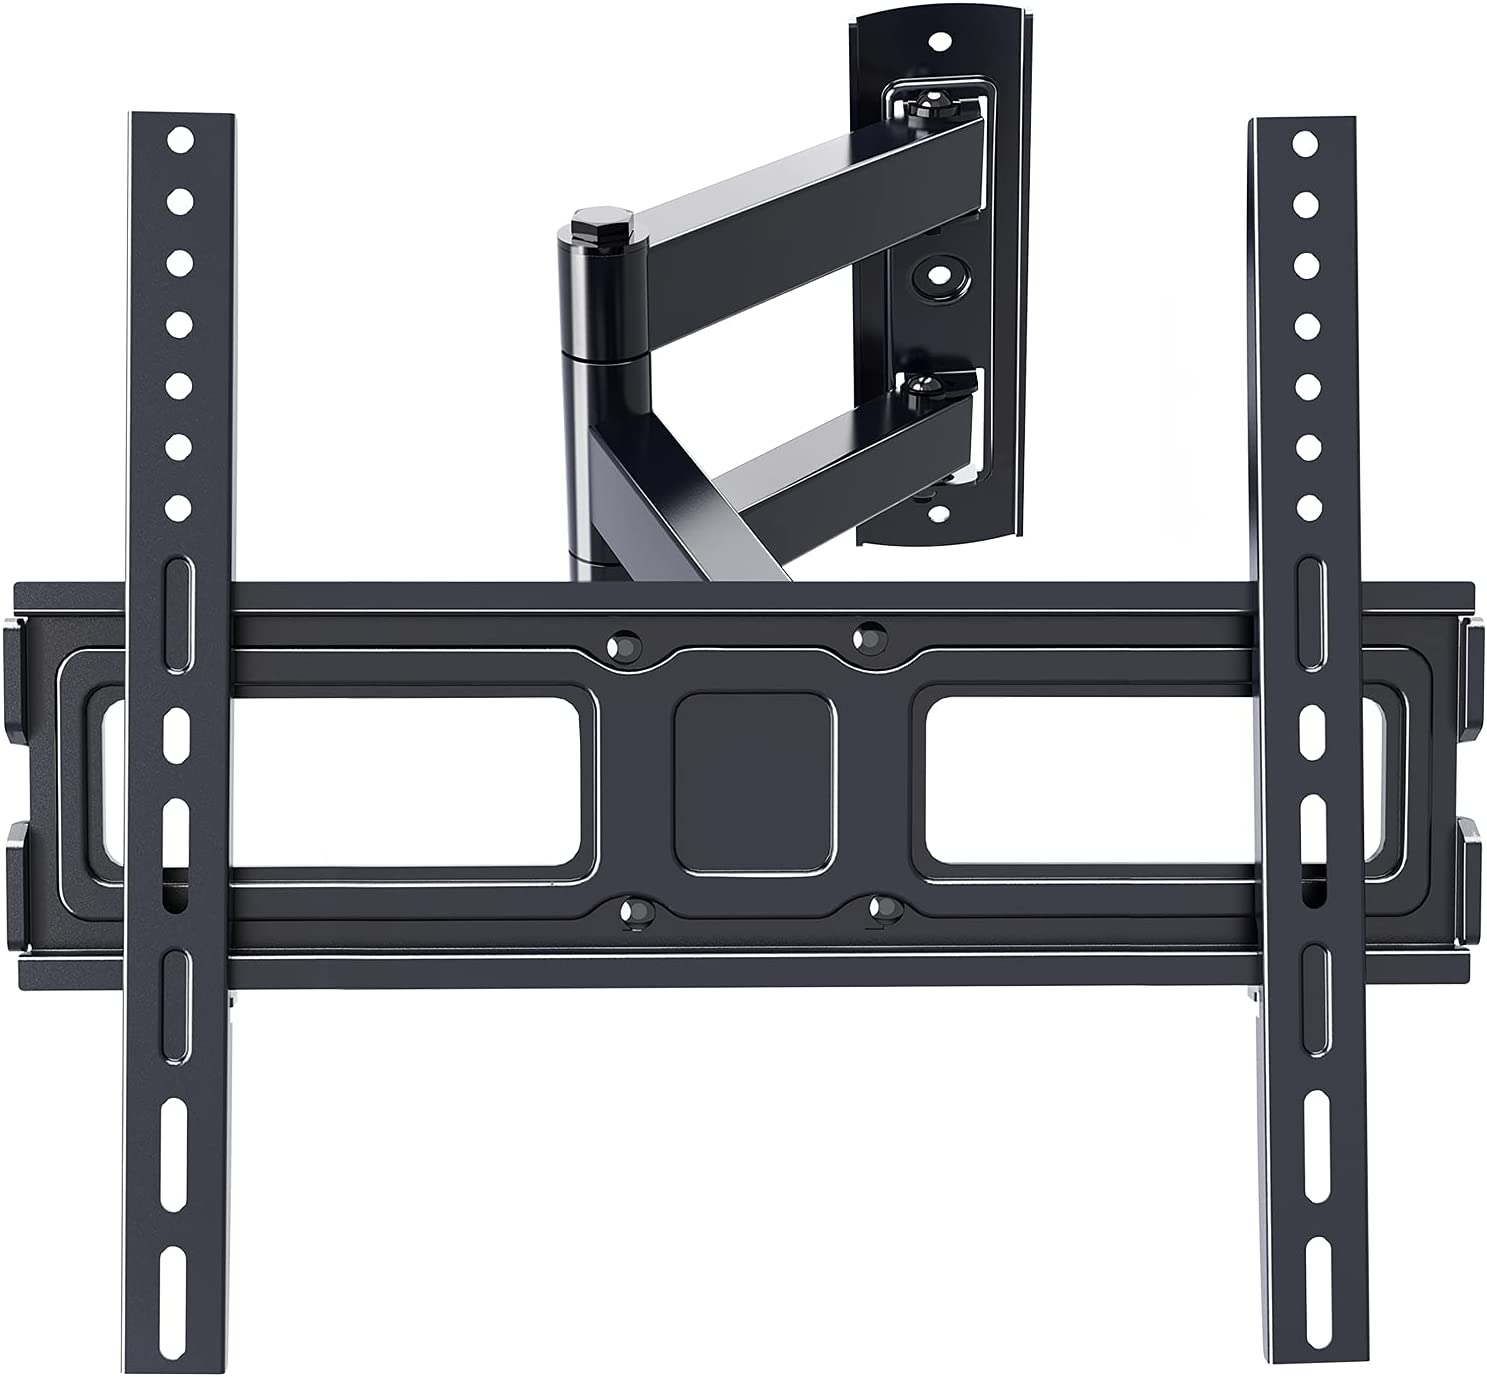 ERGO TAB Full Motion Articulating Swivel Extension TV Wall Mount with Tilt for 32-55" TV Up to 77lbs $17.60 shipped w/ Prime